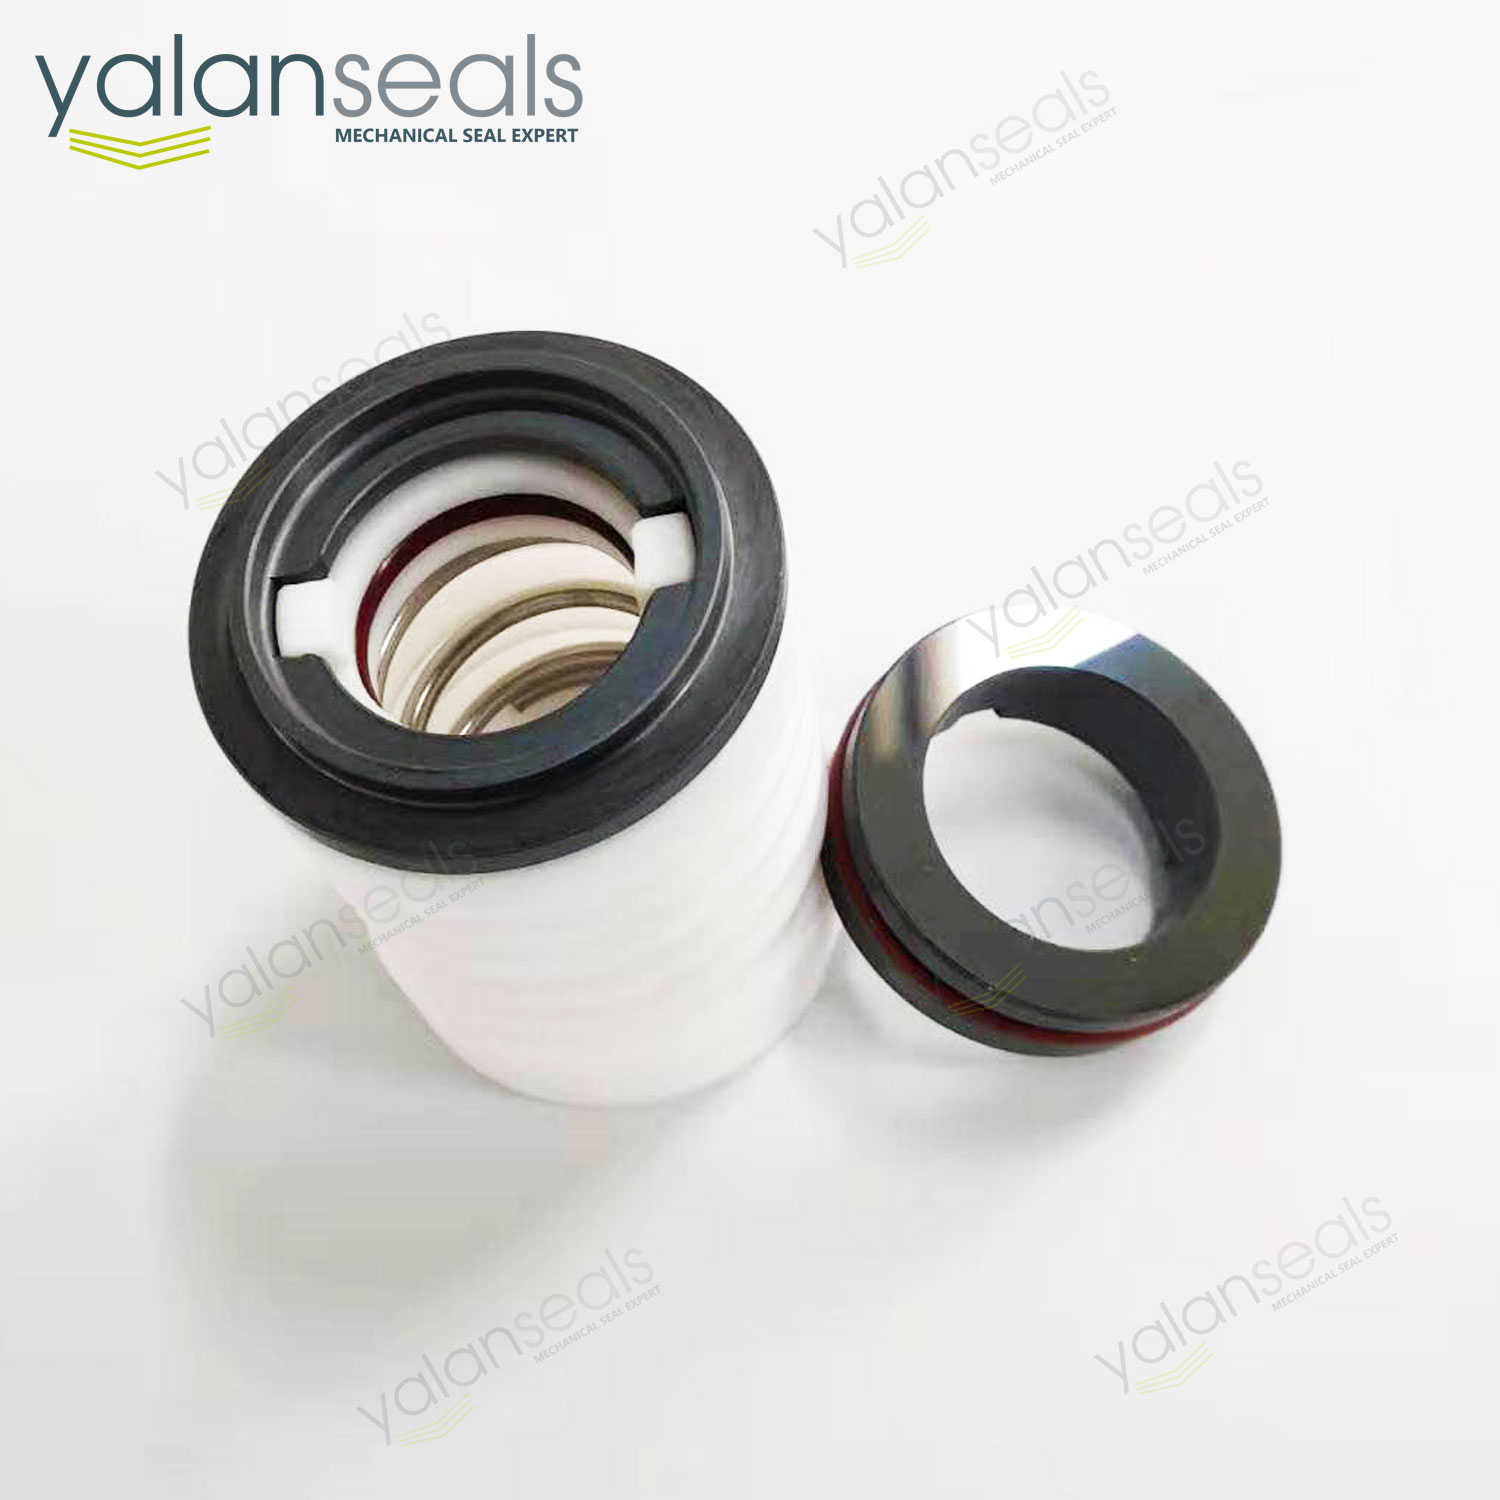 SD-25 Single Spring PTFE Bellow Mechanical Seal for Acid Pumps